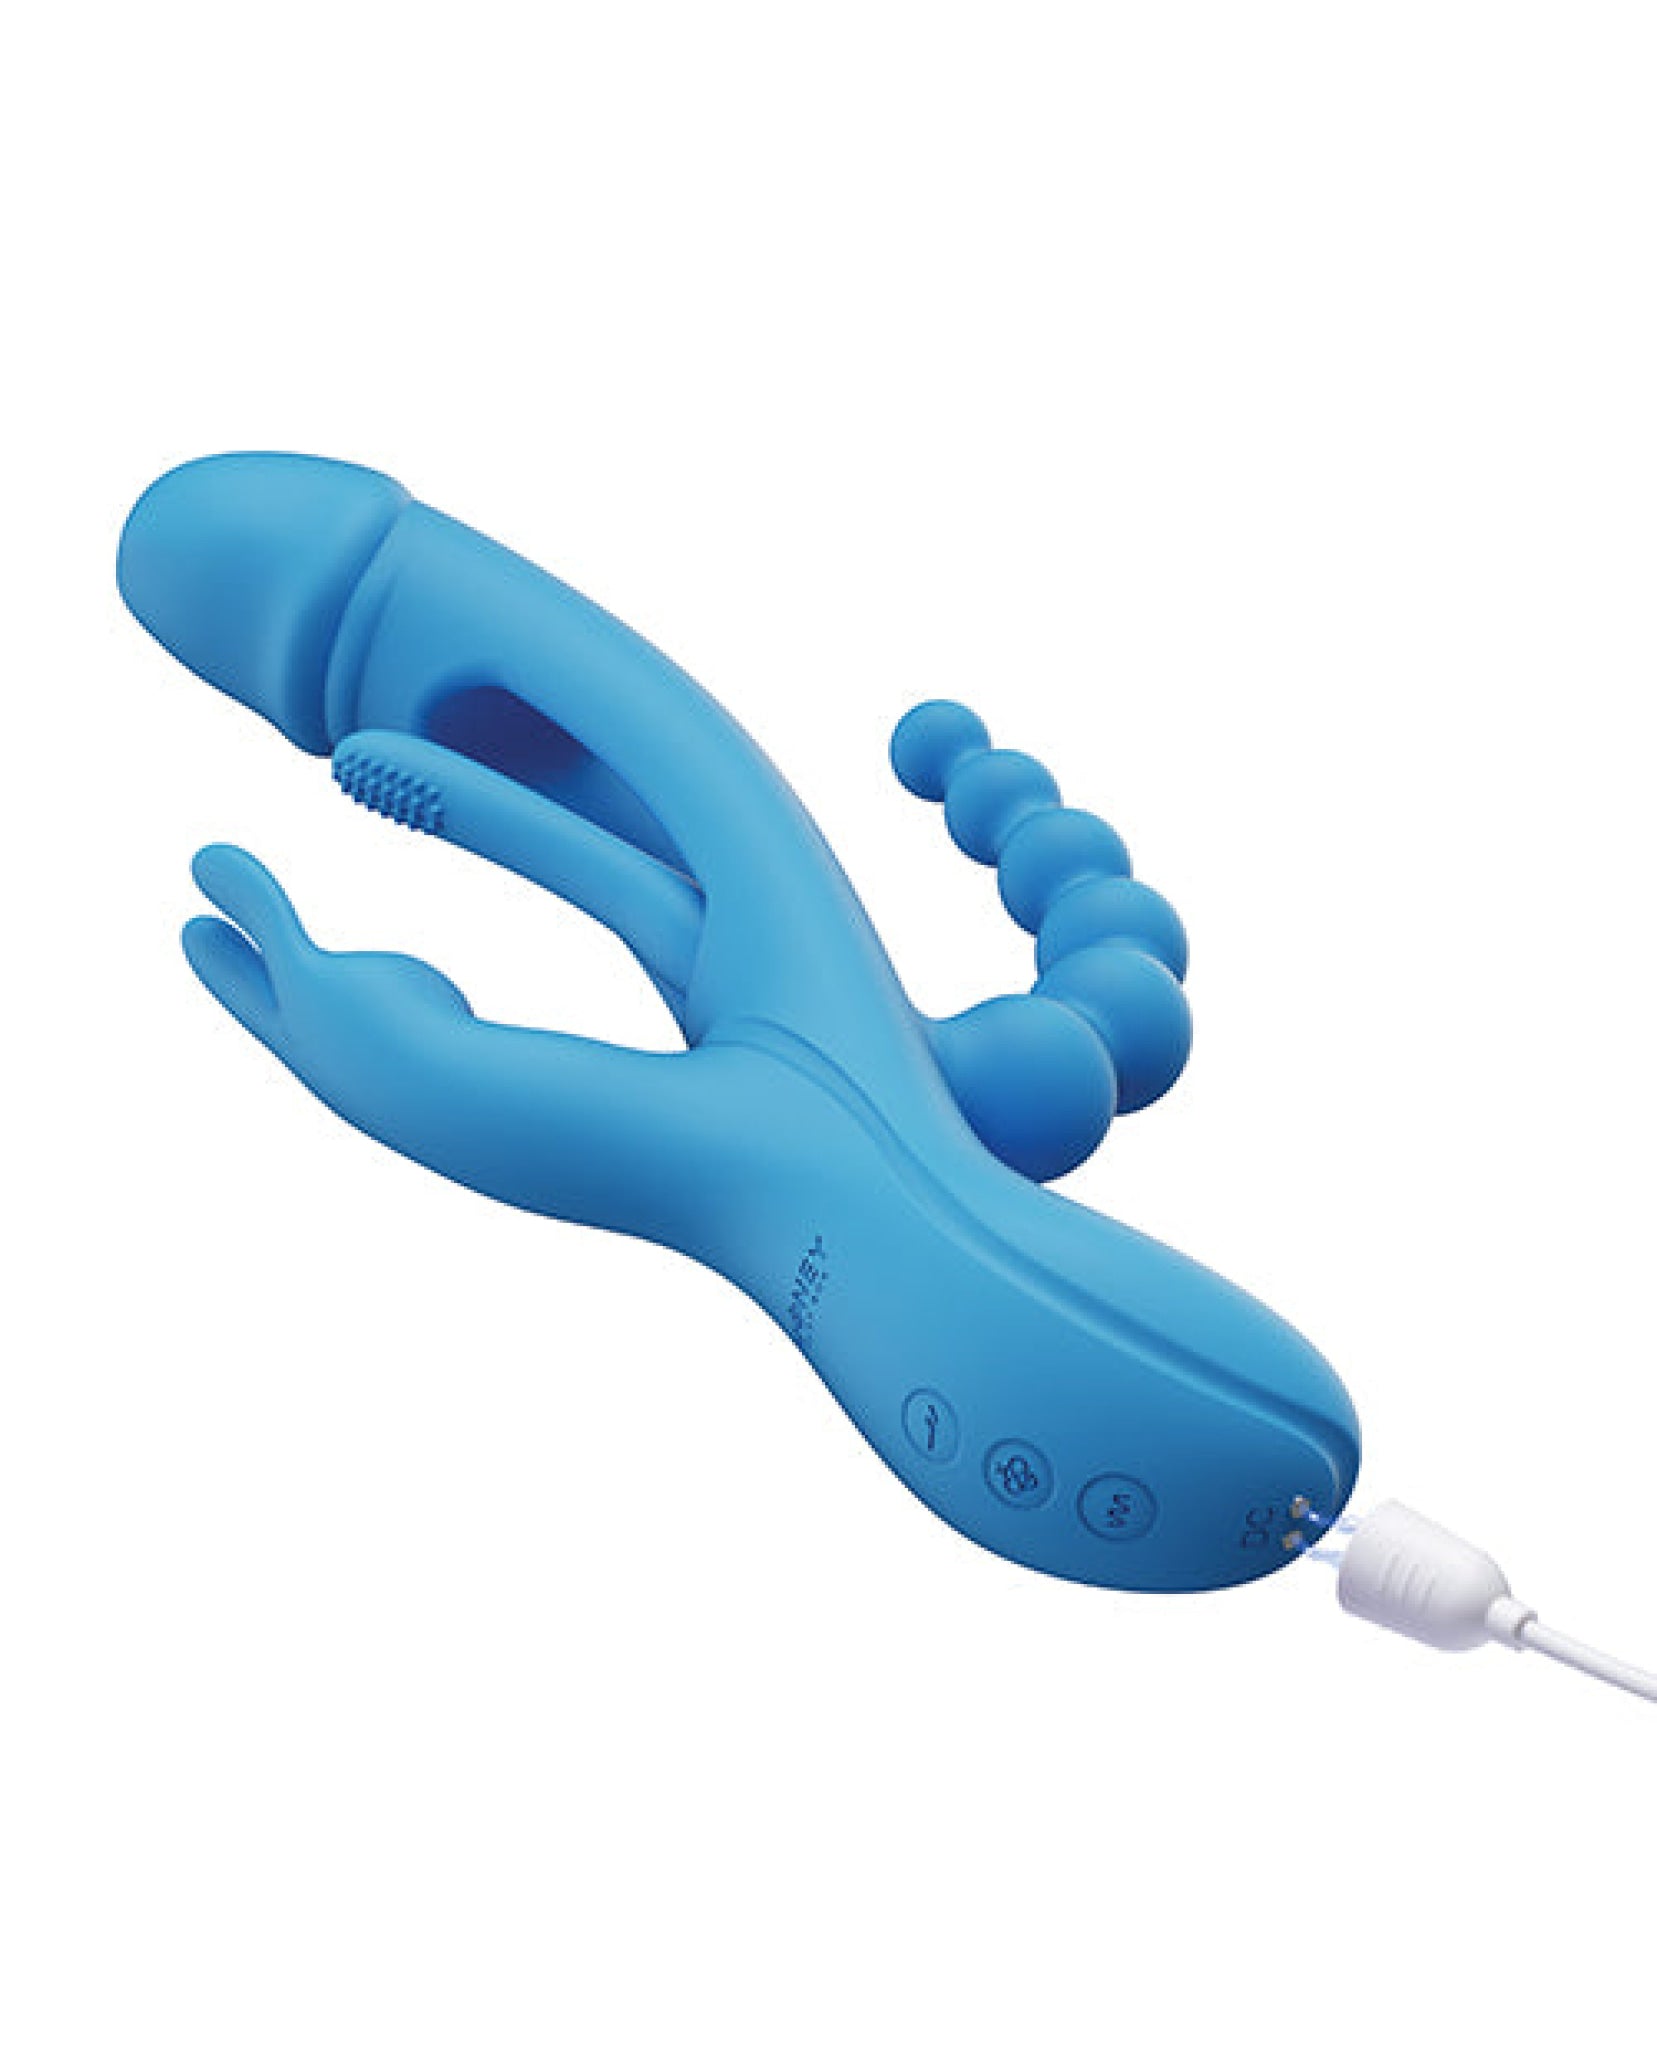 Trilux Kinky Finger Rabbit Vibrator With Anal Beads Uc Global Trade INChoney Play B